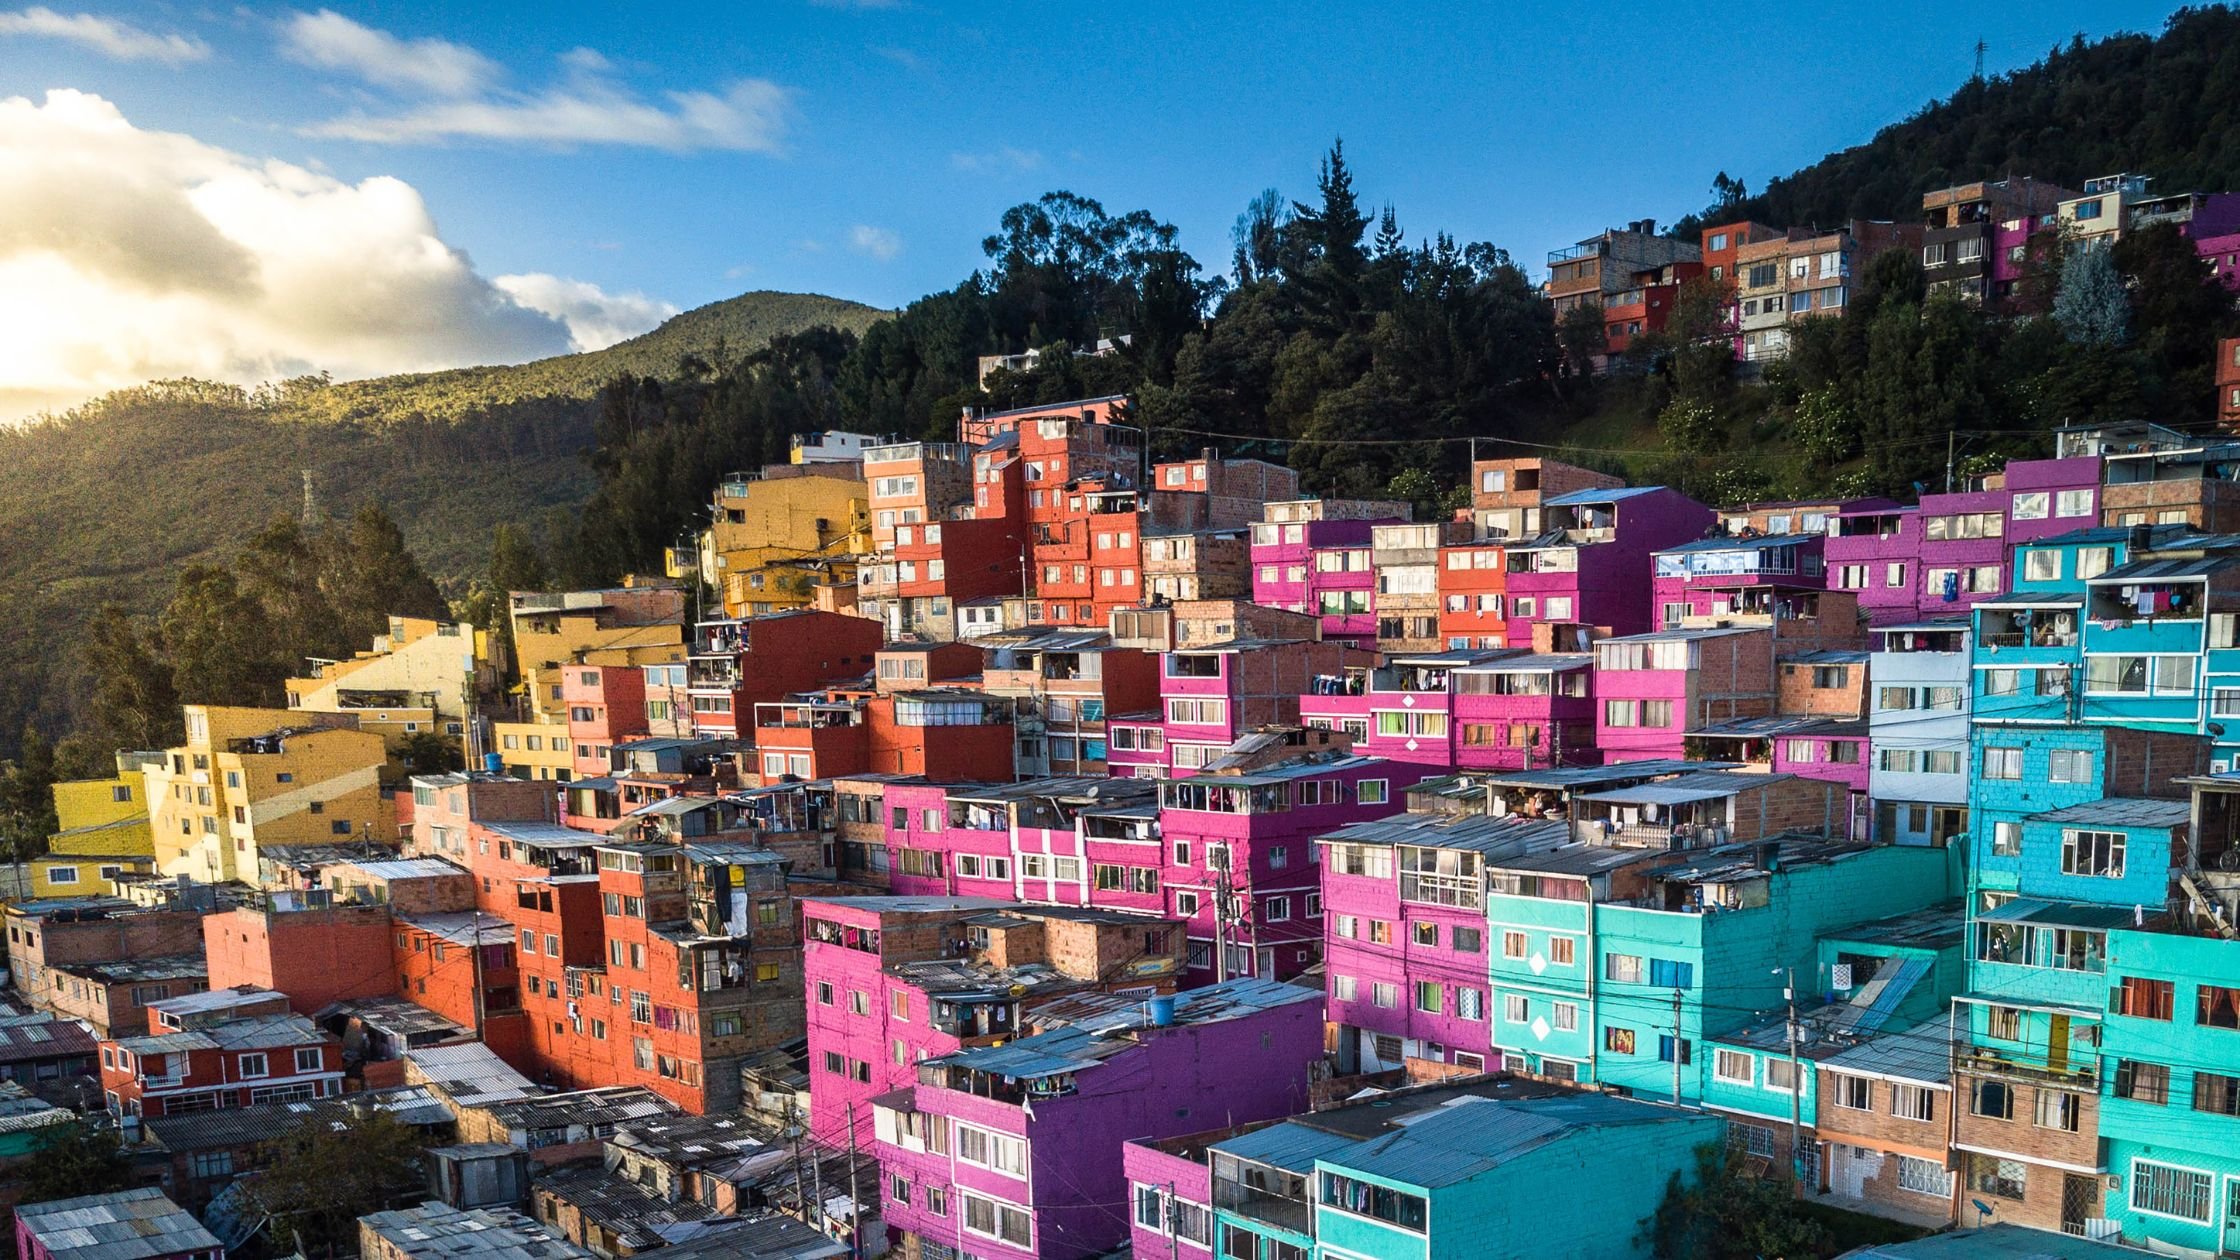 Communities of Medellin, Colombia - After your visa is approved, you'll arrive in Colombia and complete your registration with local authorities.